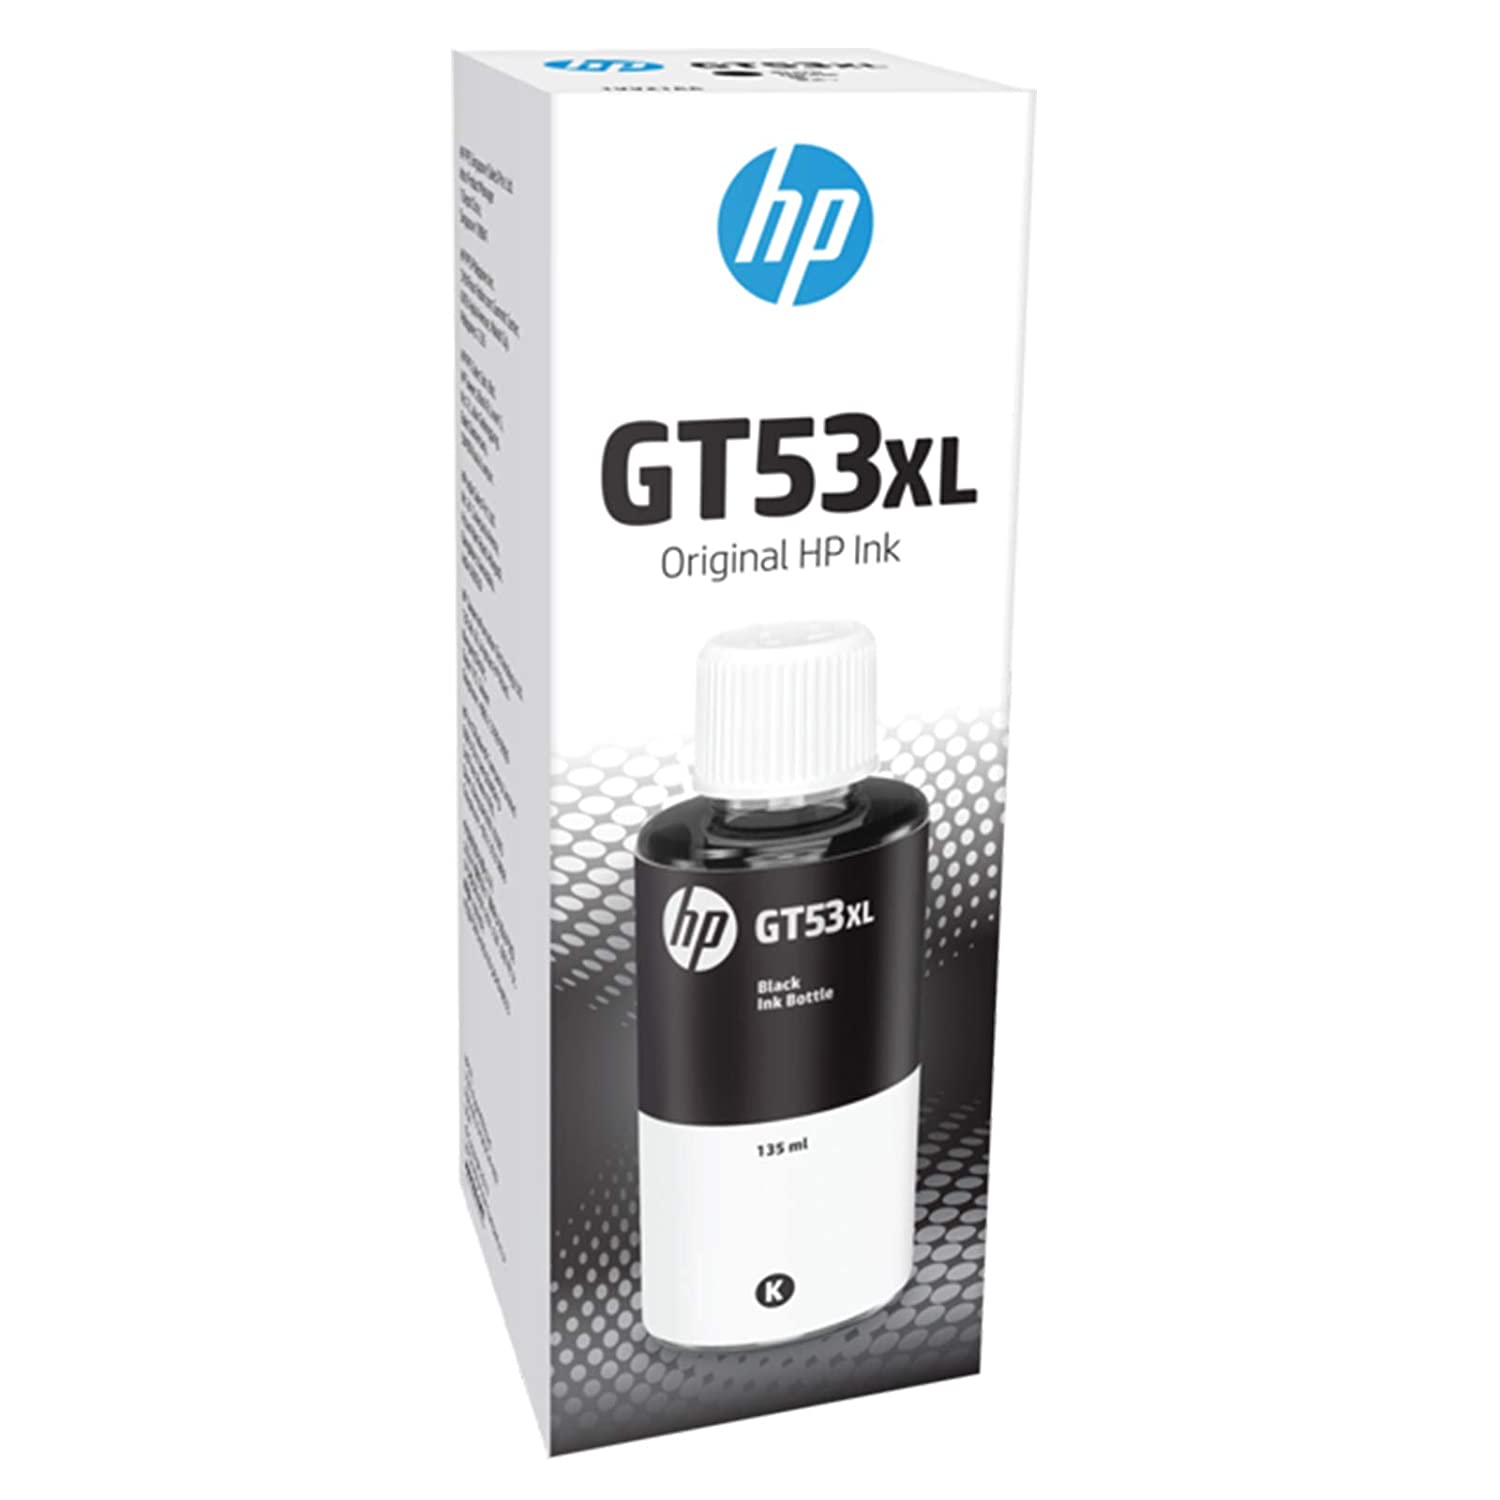 HP GT53 XL and GT52 Refill Ink Bottle for HP Ink Tank Printers